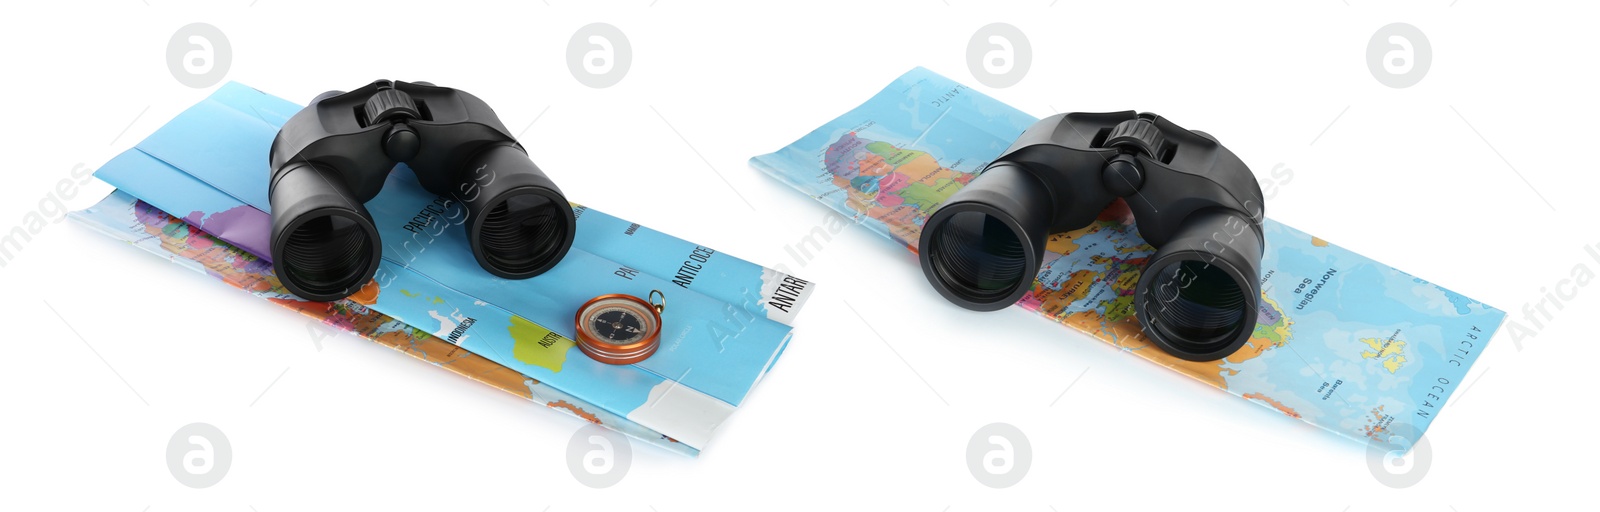 Image of Binoculars, maps and compass on white background